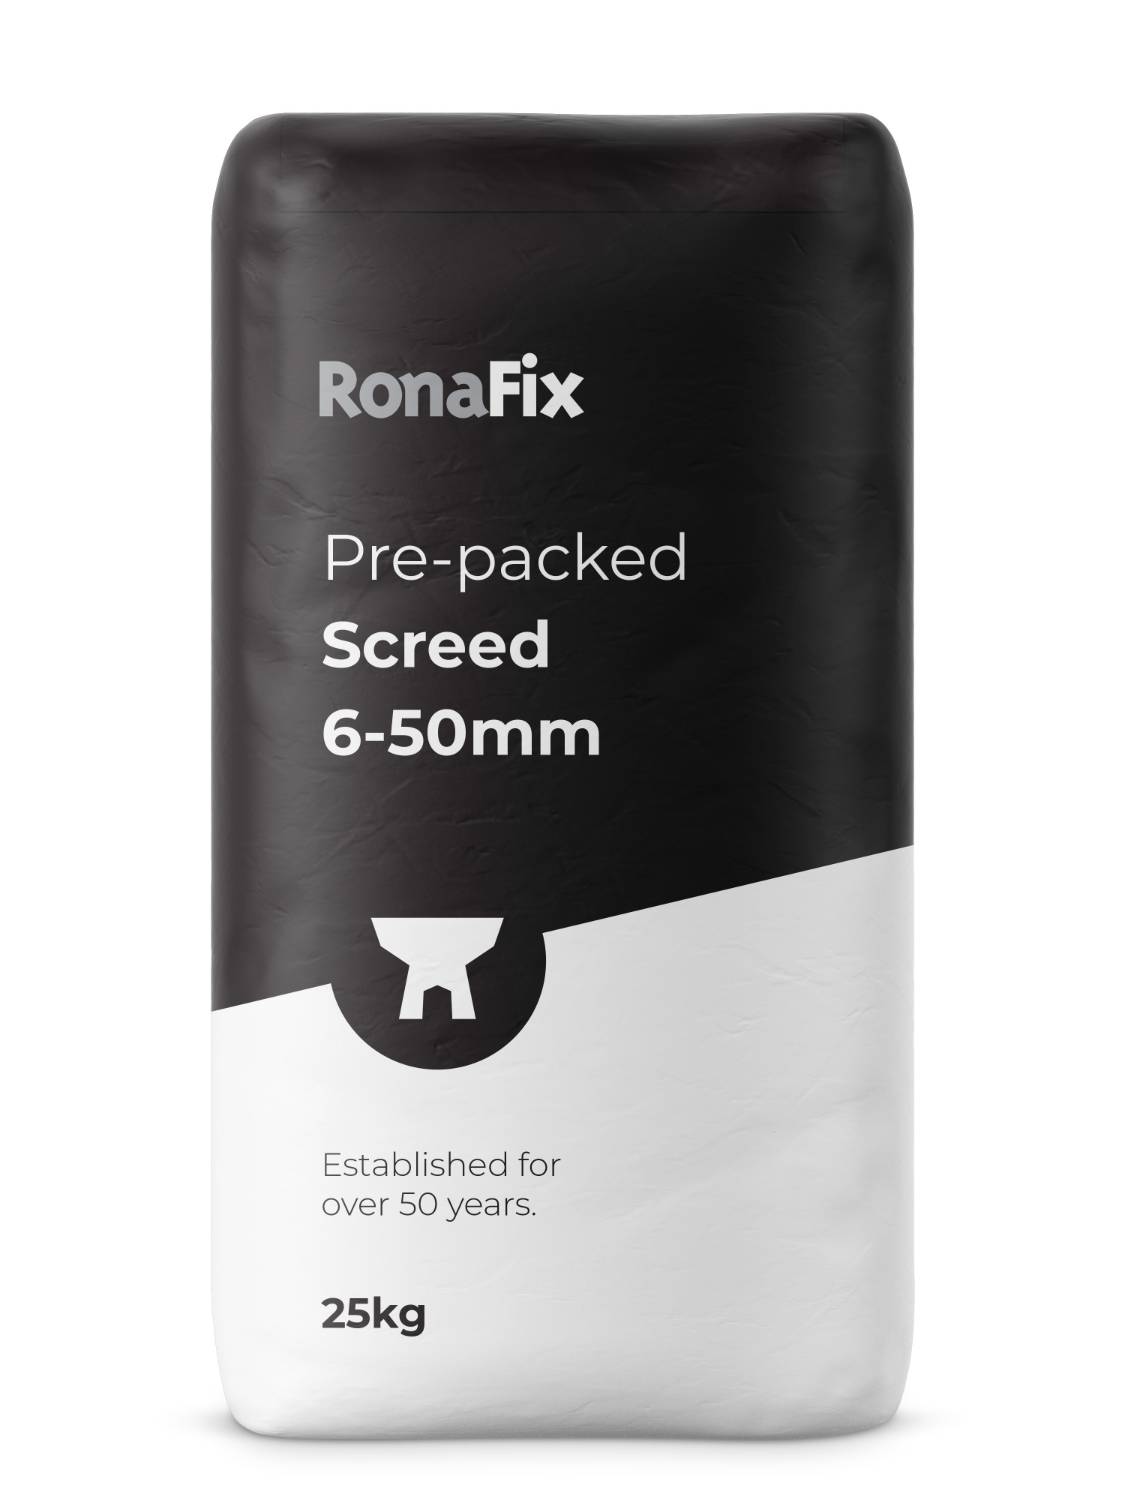 Ronafix Pre-packed Screed 6-50mm | Polymer Screed